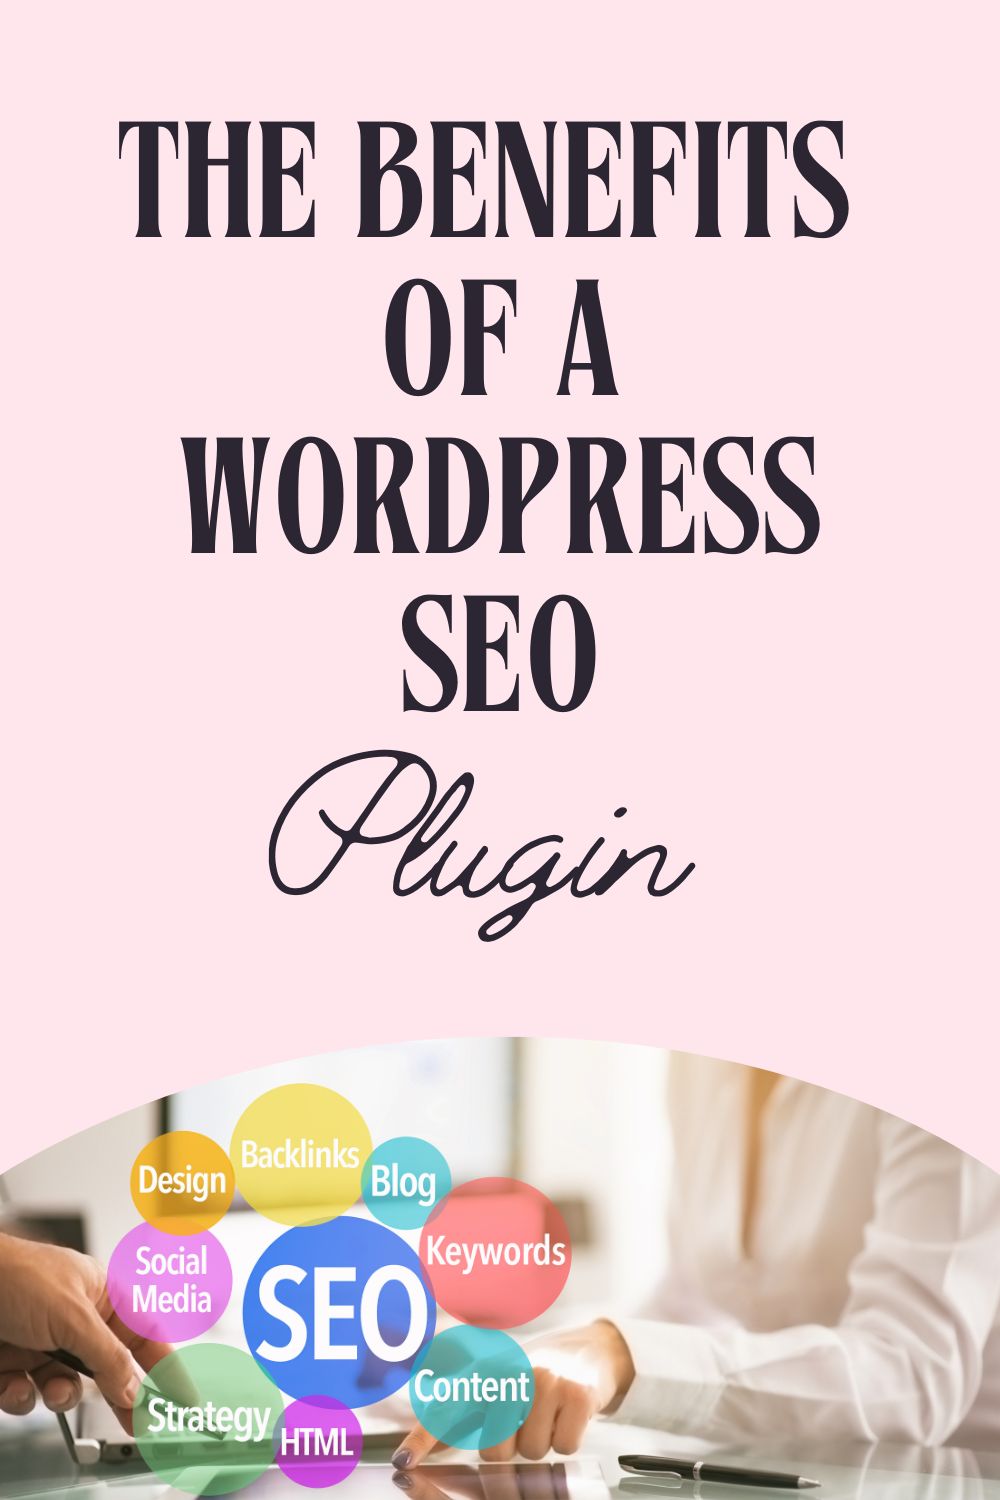 Read about the benefits of WordPress SEO plugins! Enhance visibility, optimize content, and boost rankings with these essential tools.